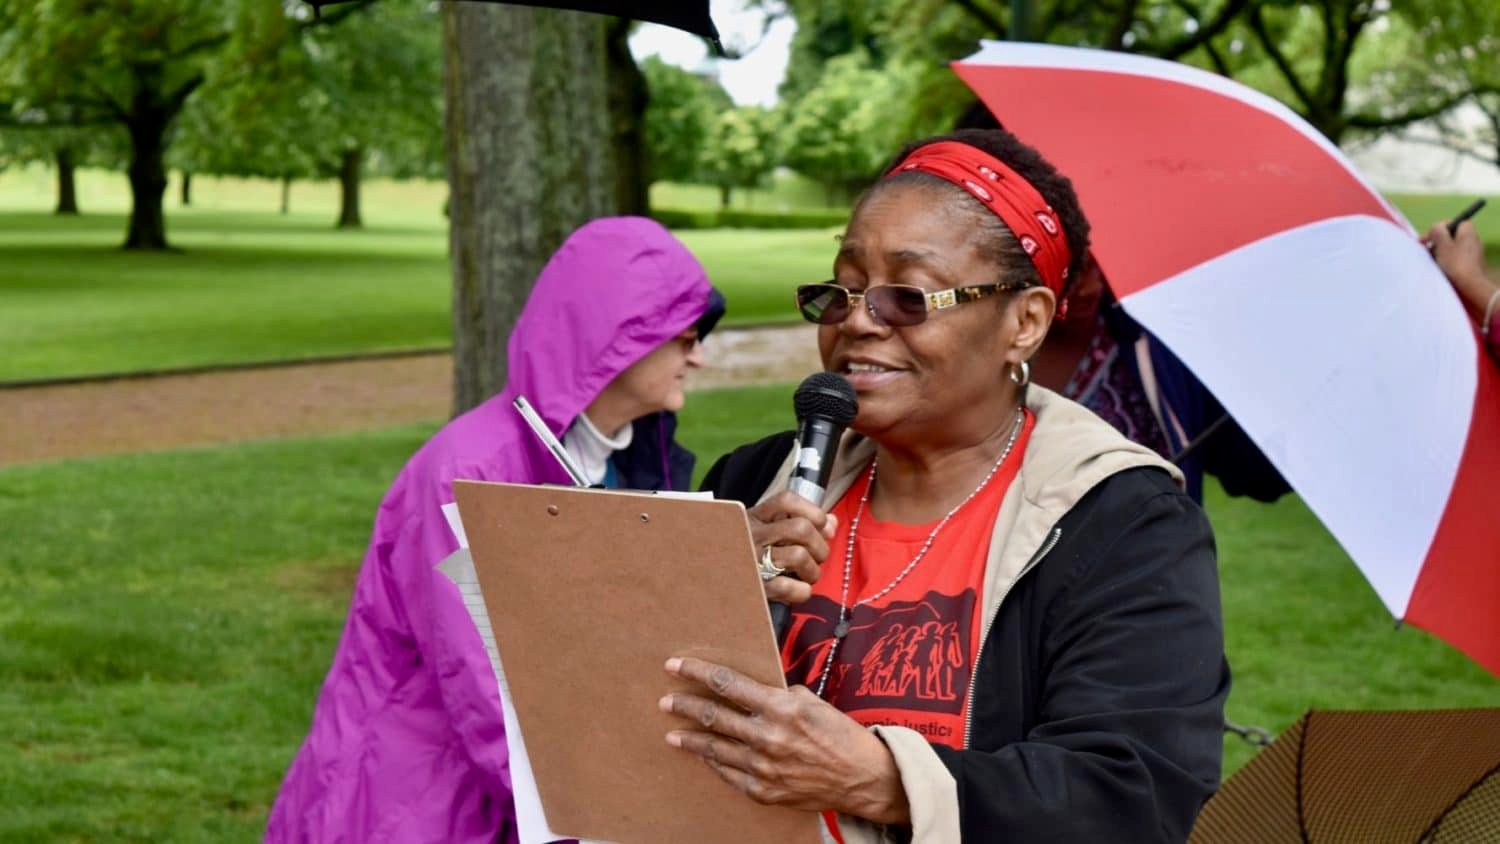 Rhode Island News: Week four of the Rhode Island Poor People’s Campaign takes on ecological devastation and health care